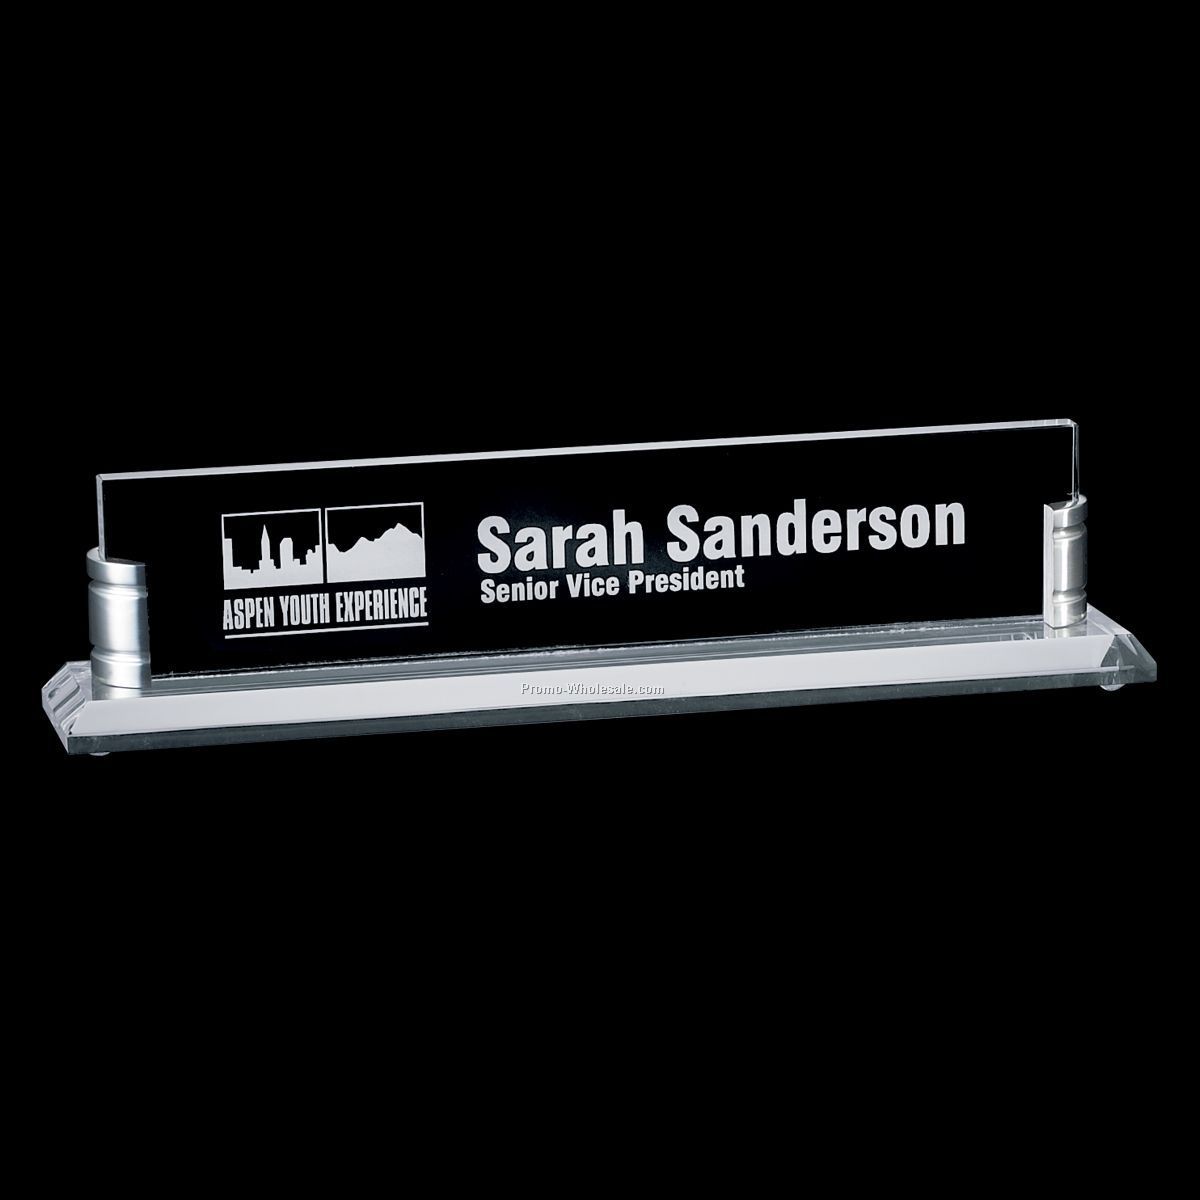 Acrylic Name Plate with stand